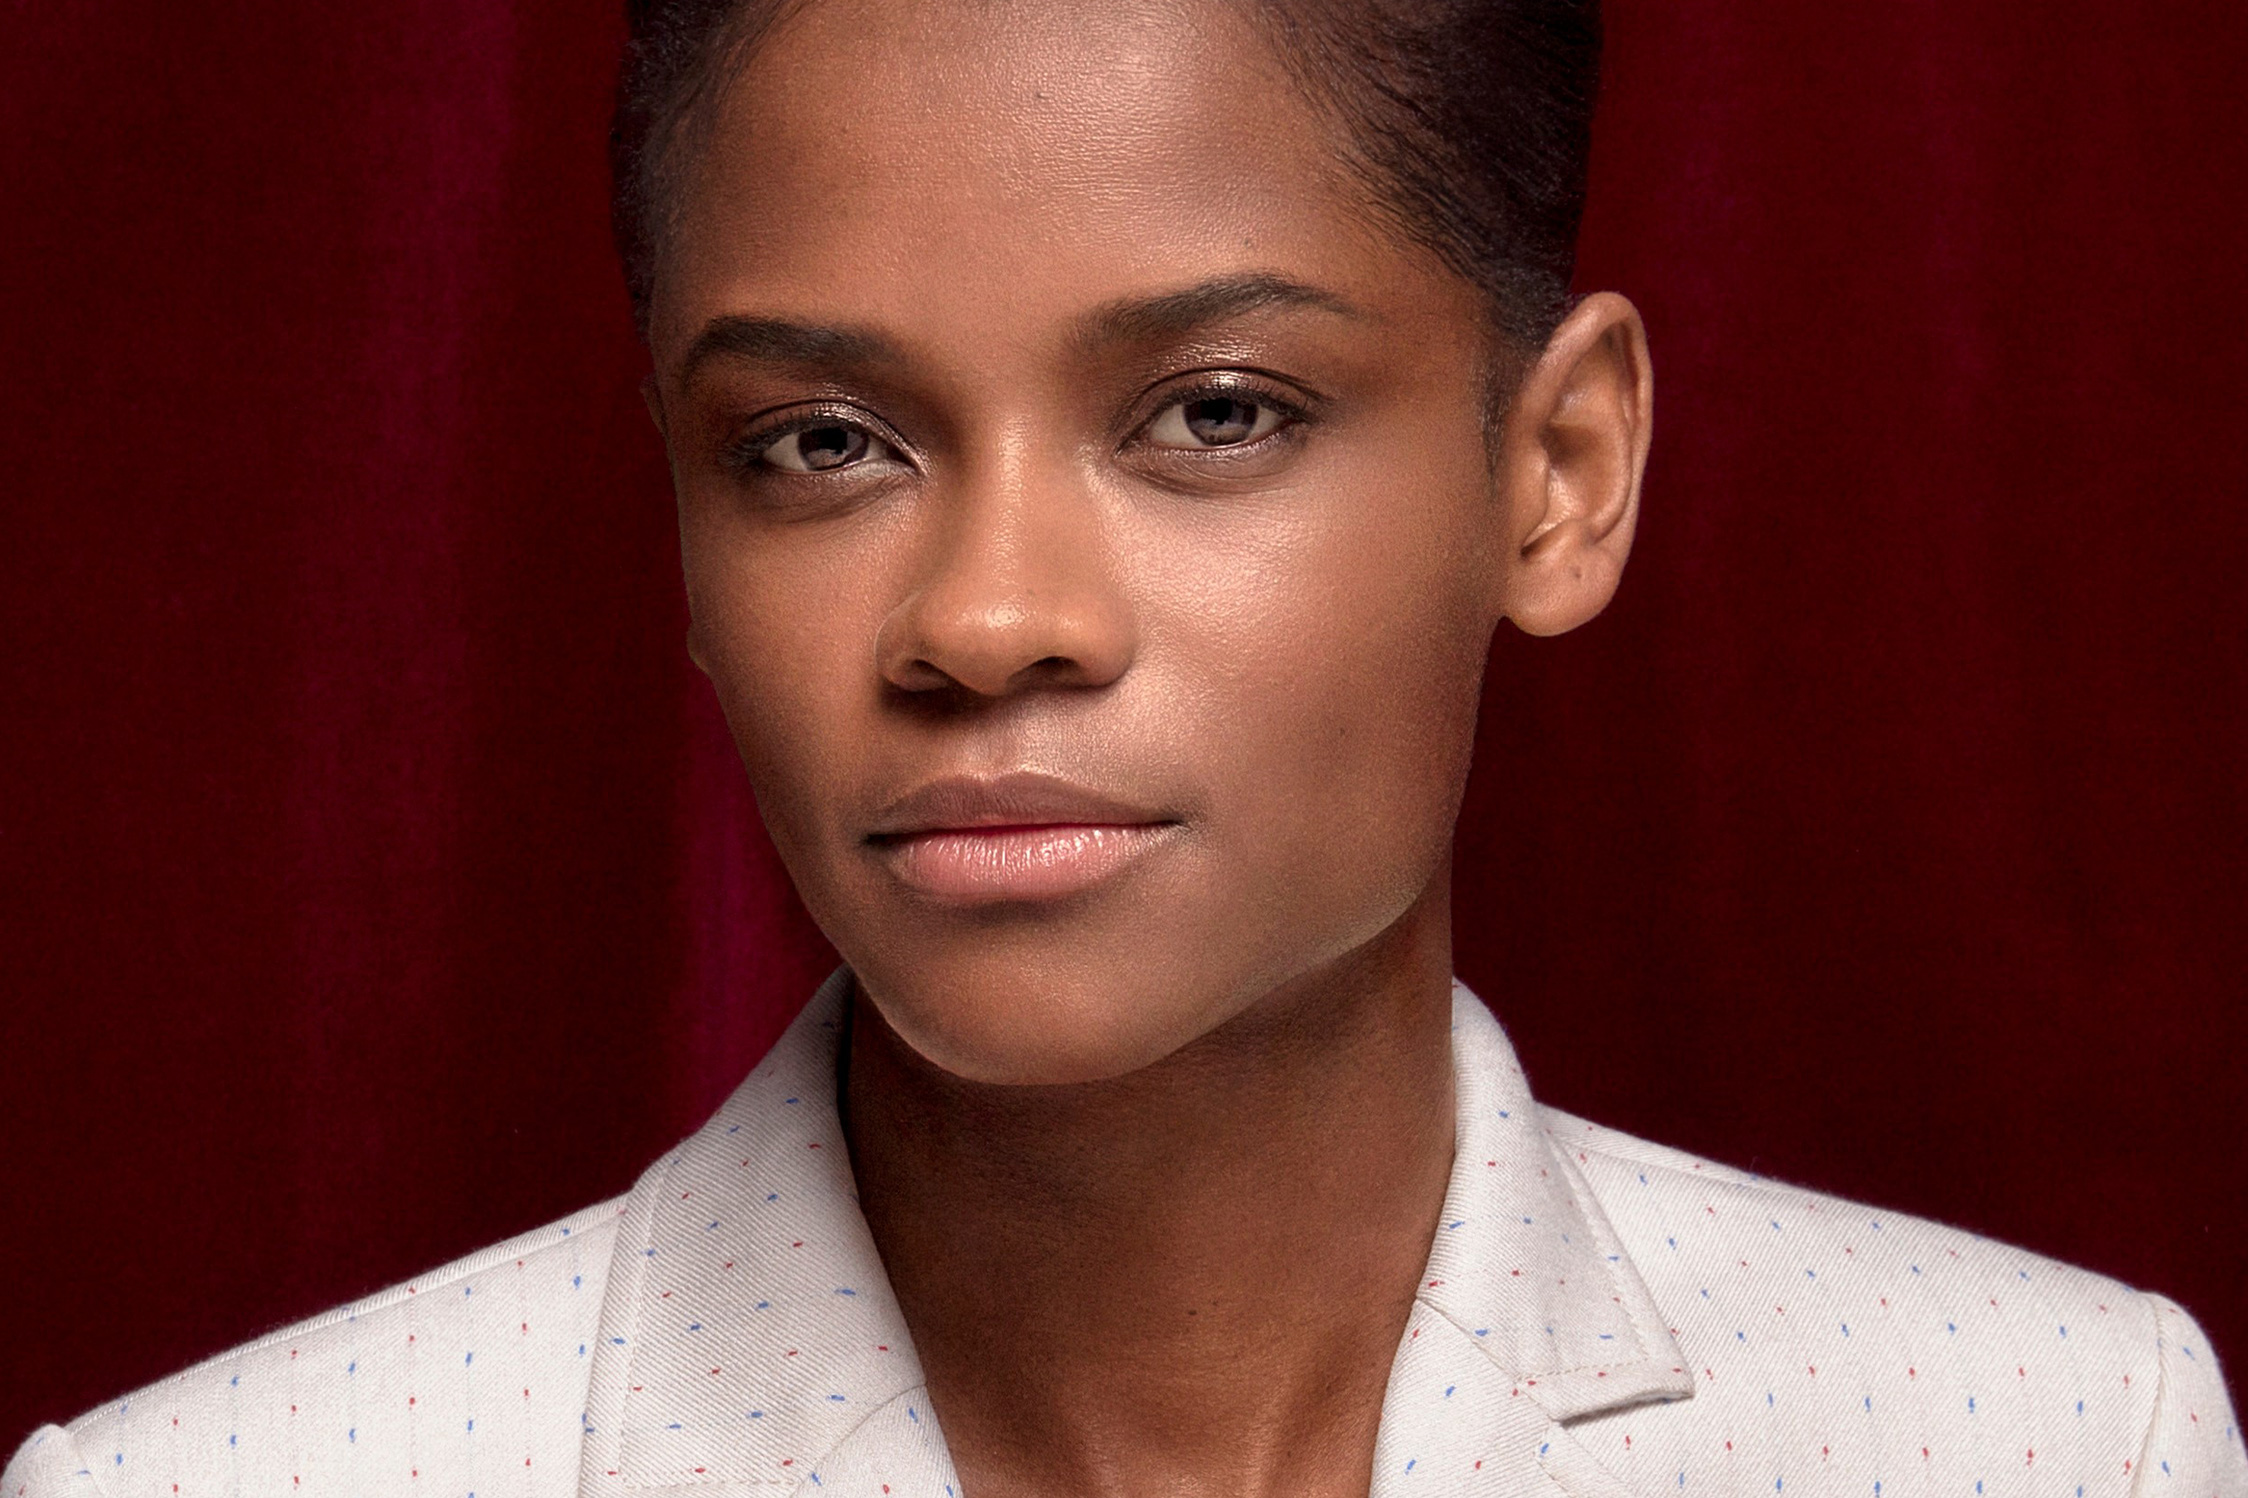 Letitia Wright Is Finding Joy - RELEVANT.